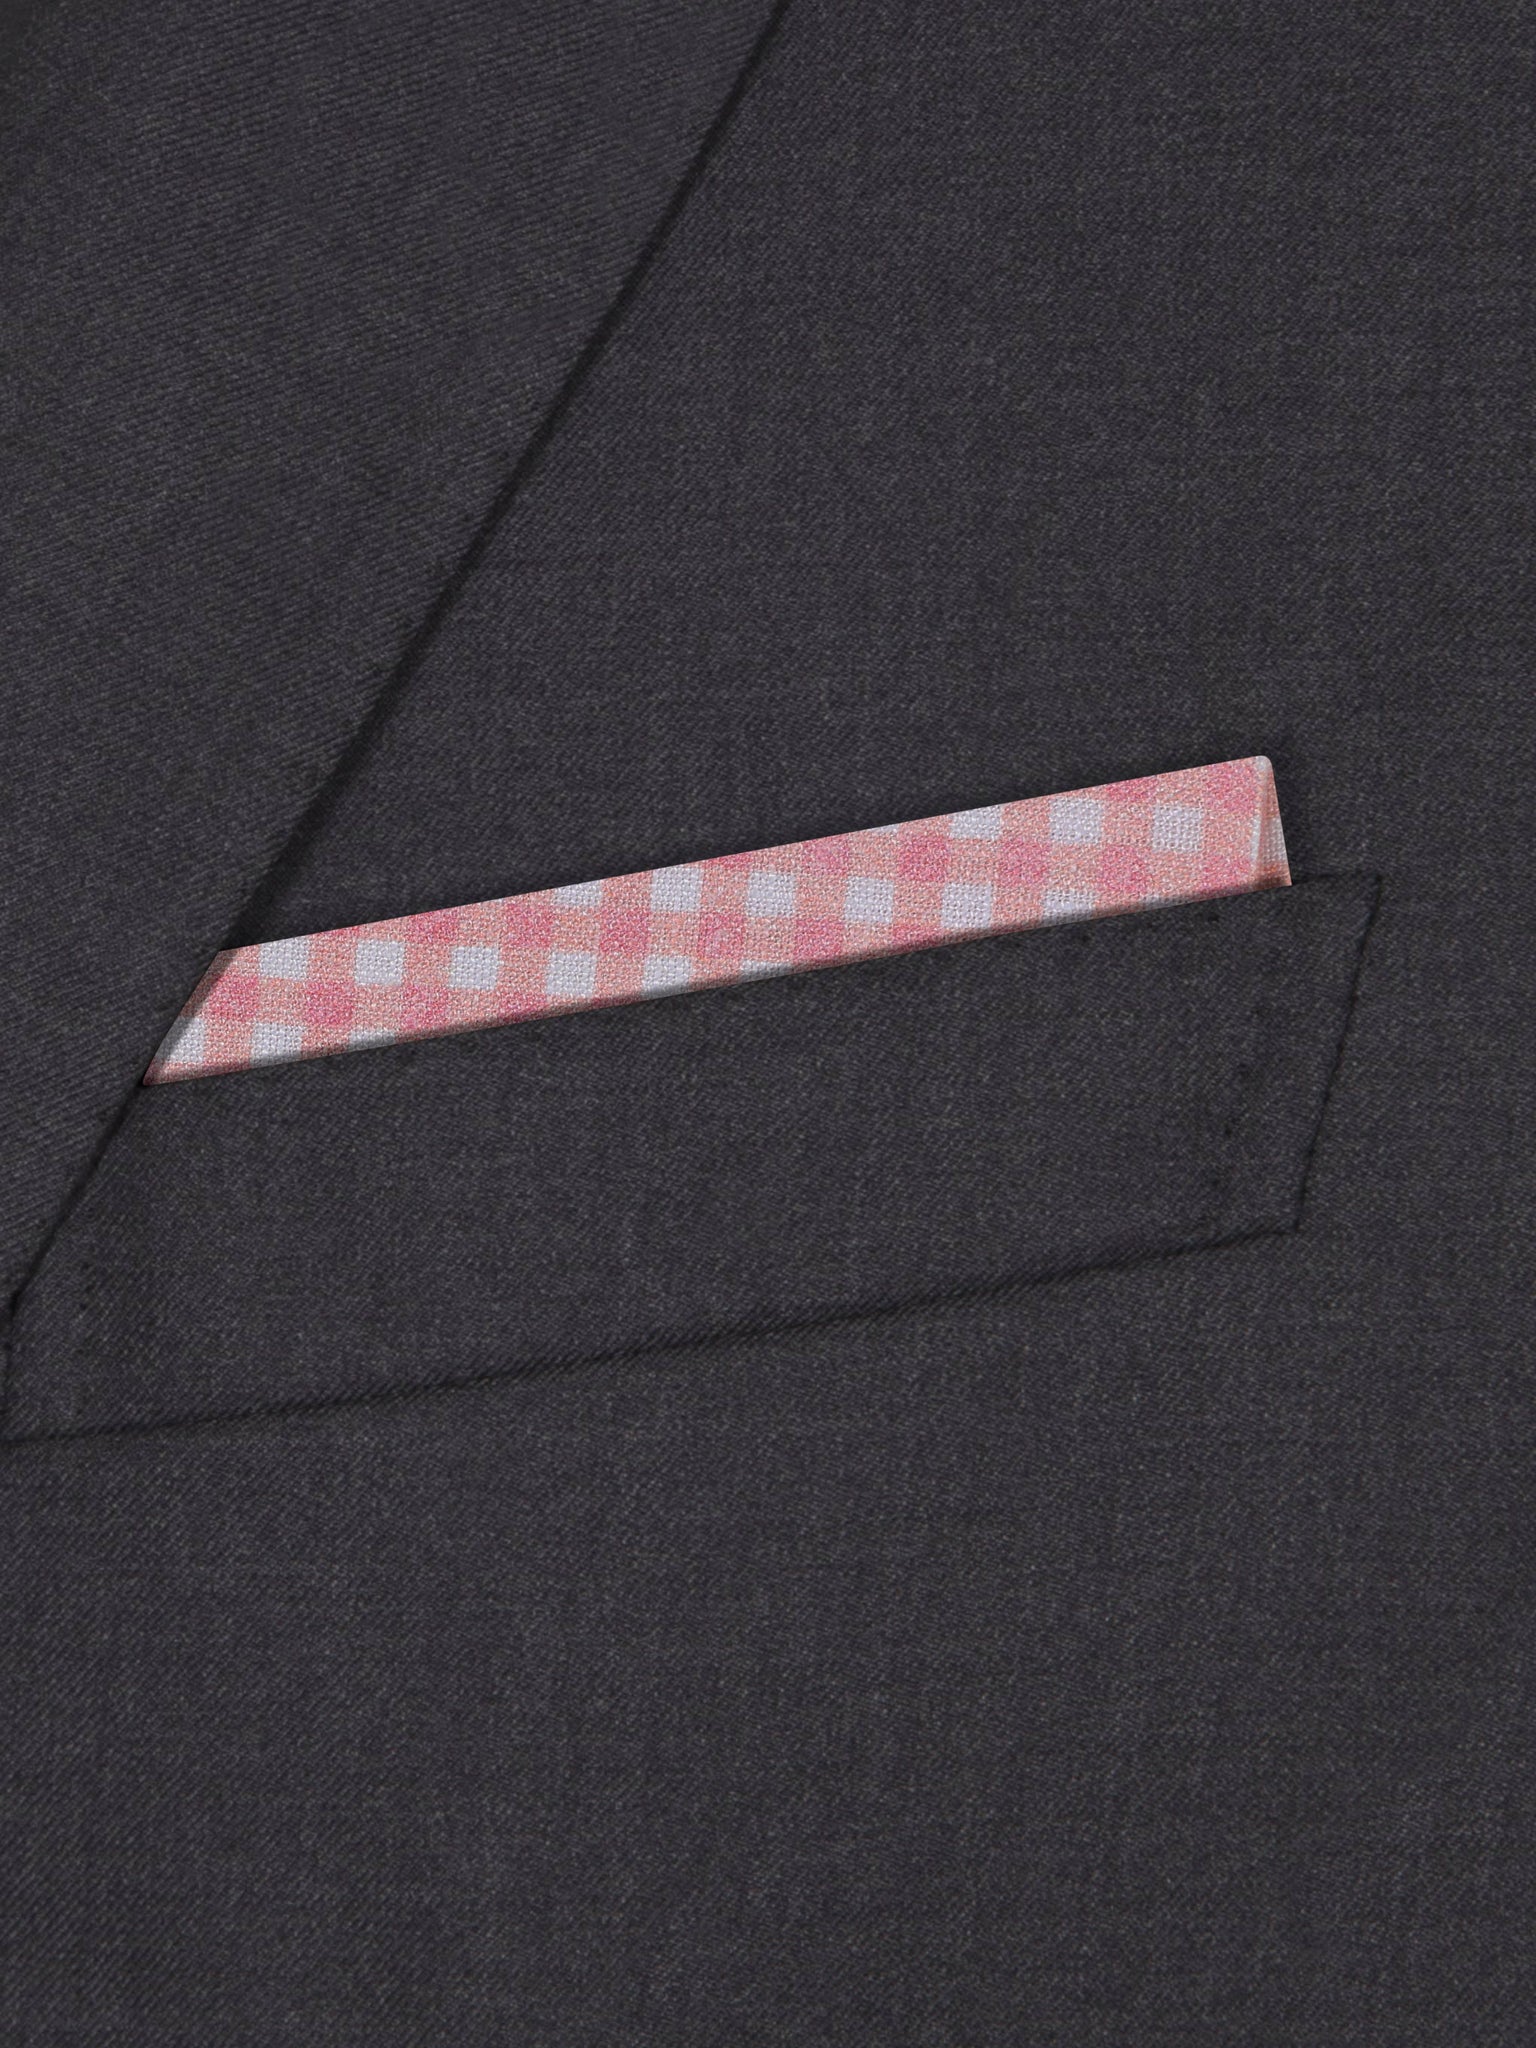 Checkered Past (Pink) - Pocket Square